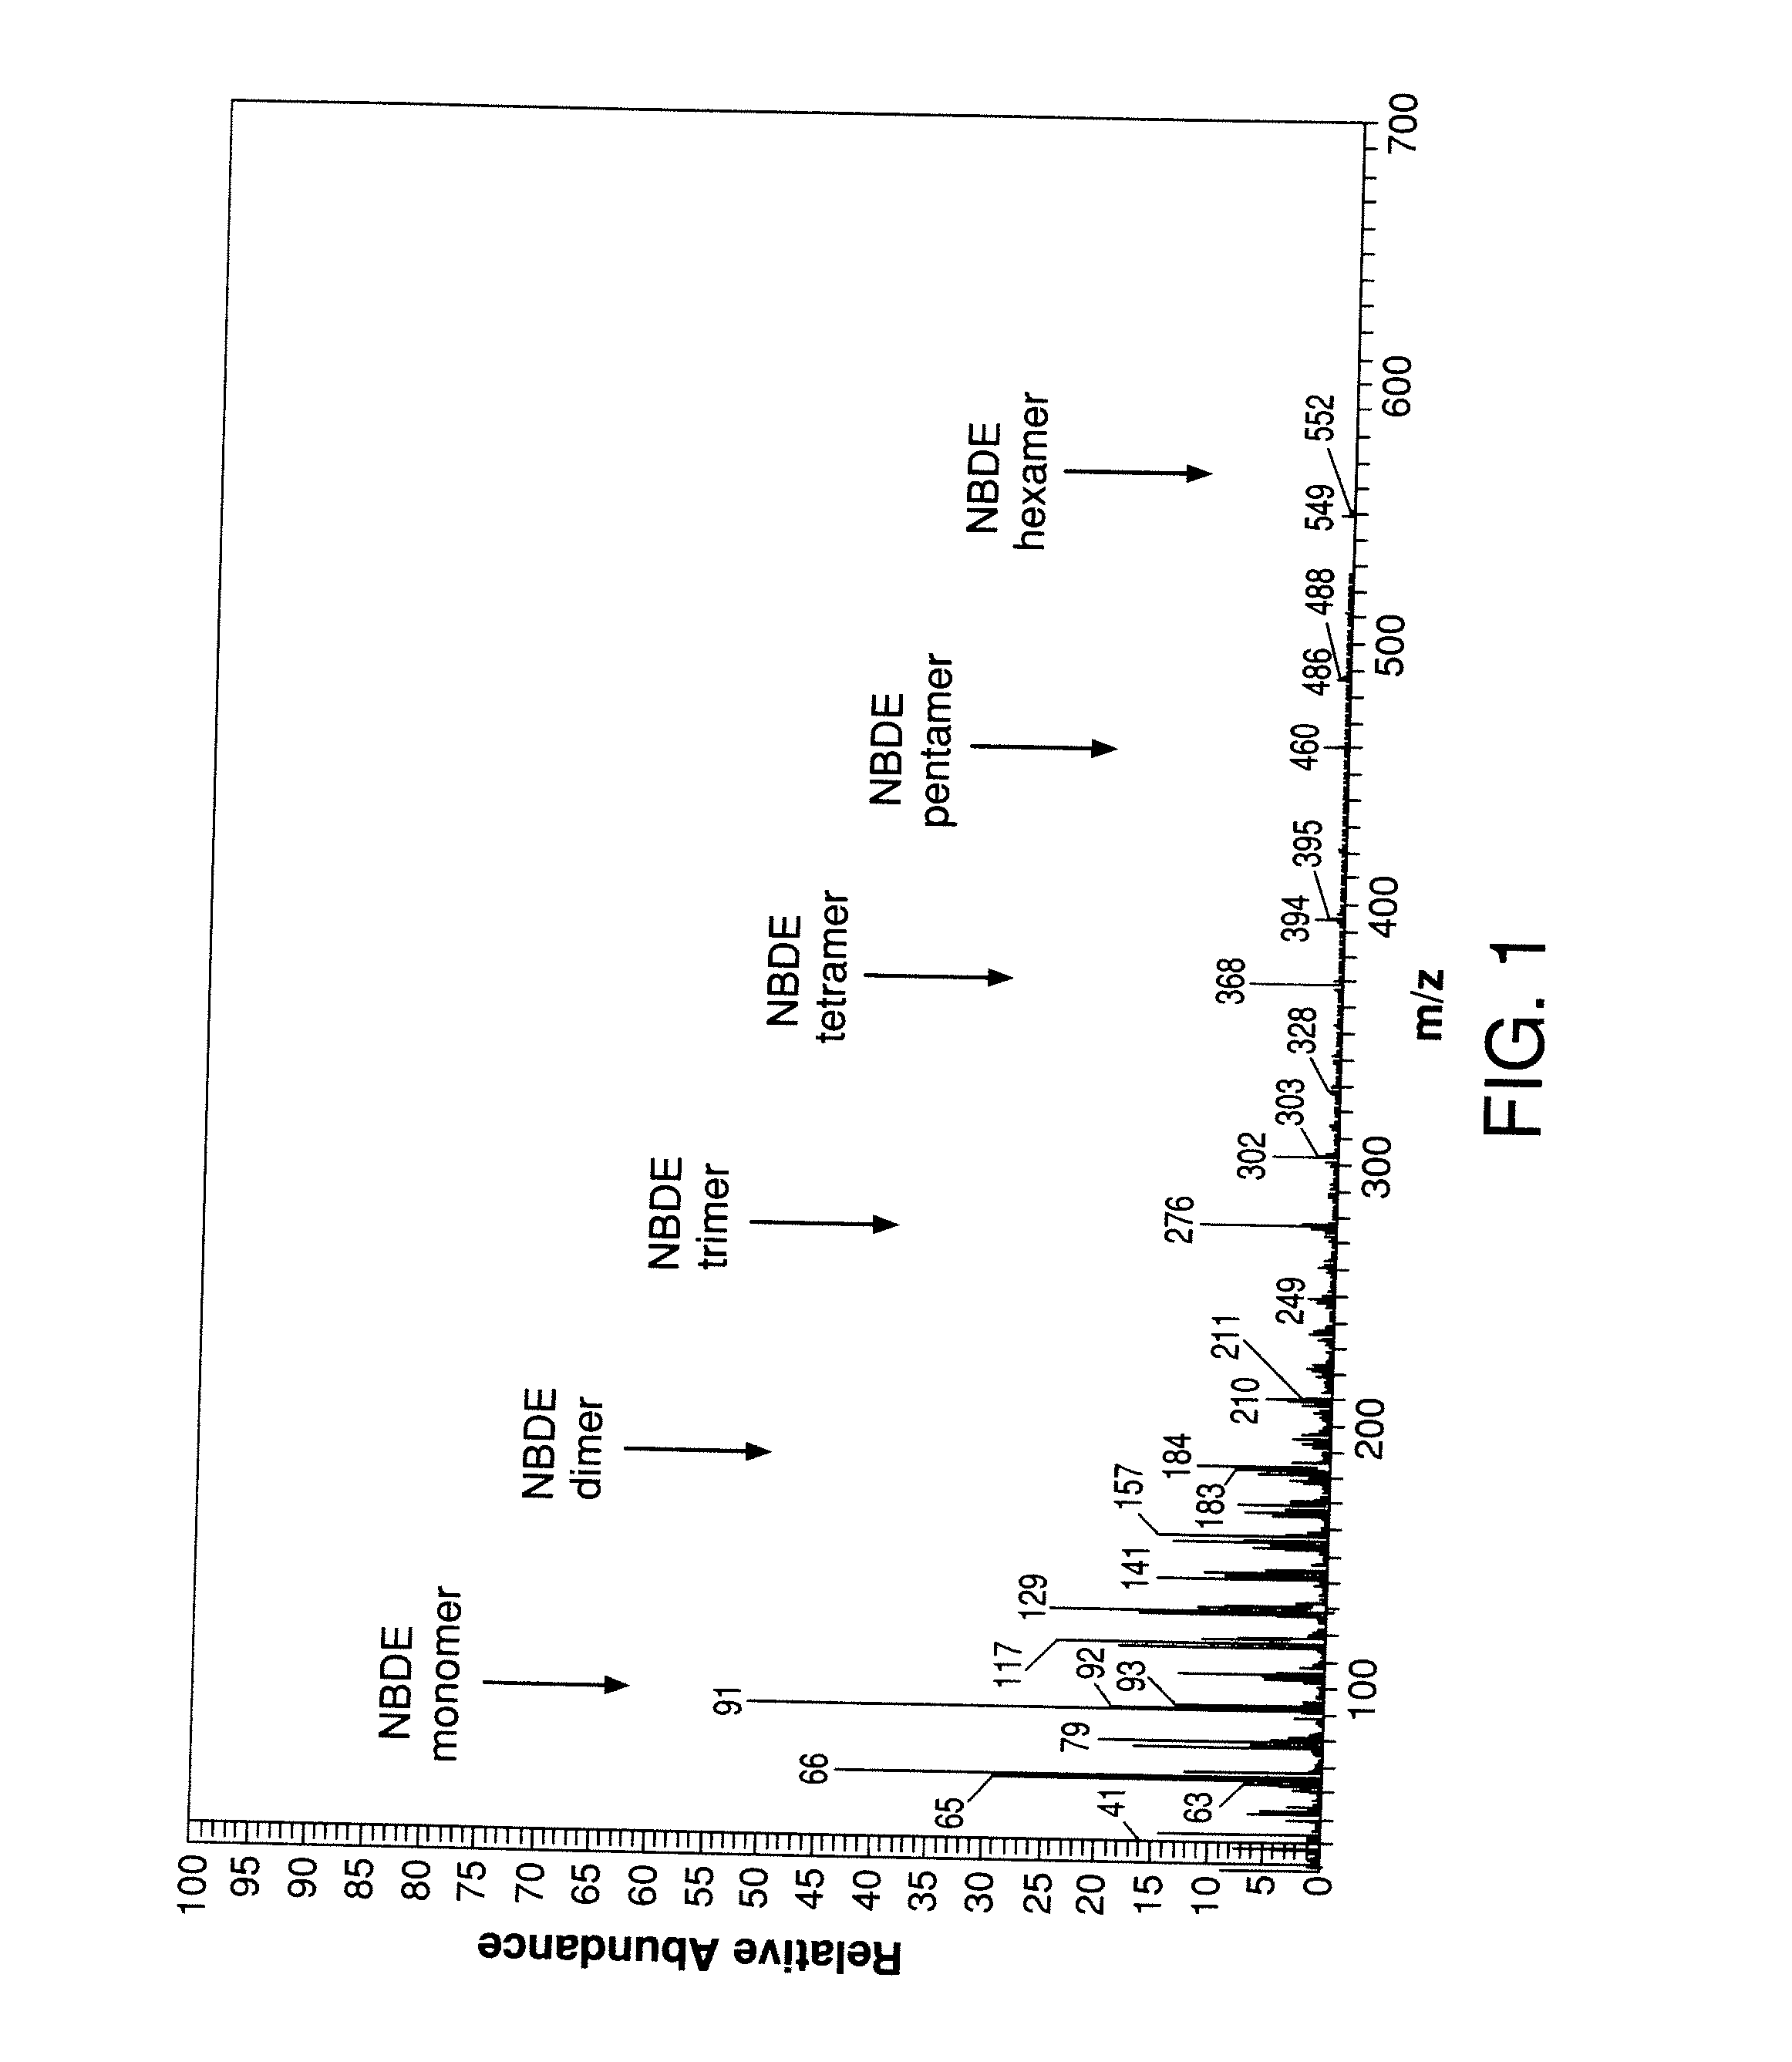 Stabilizers for the Stabilization of Unsaturated Hydrocarbon-based Precursor